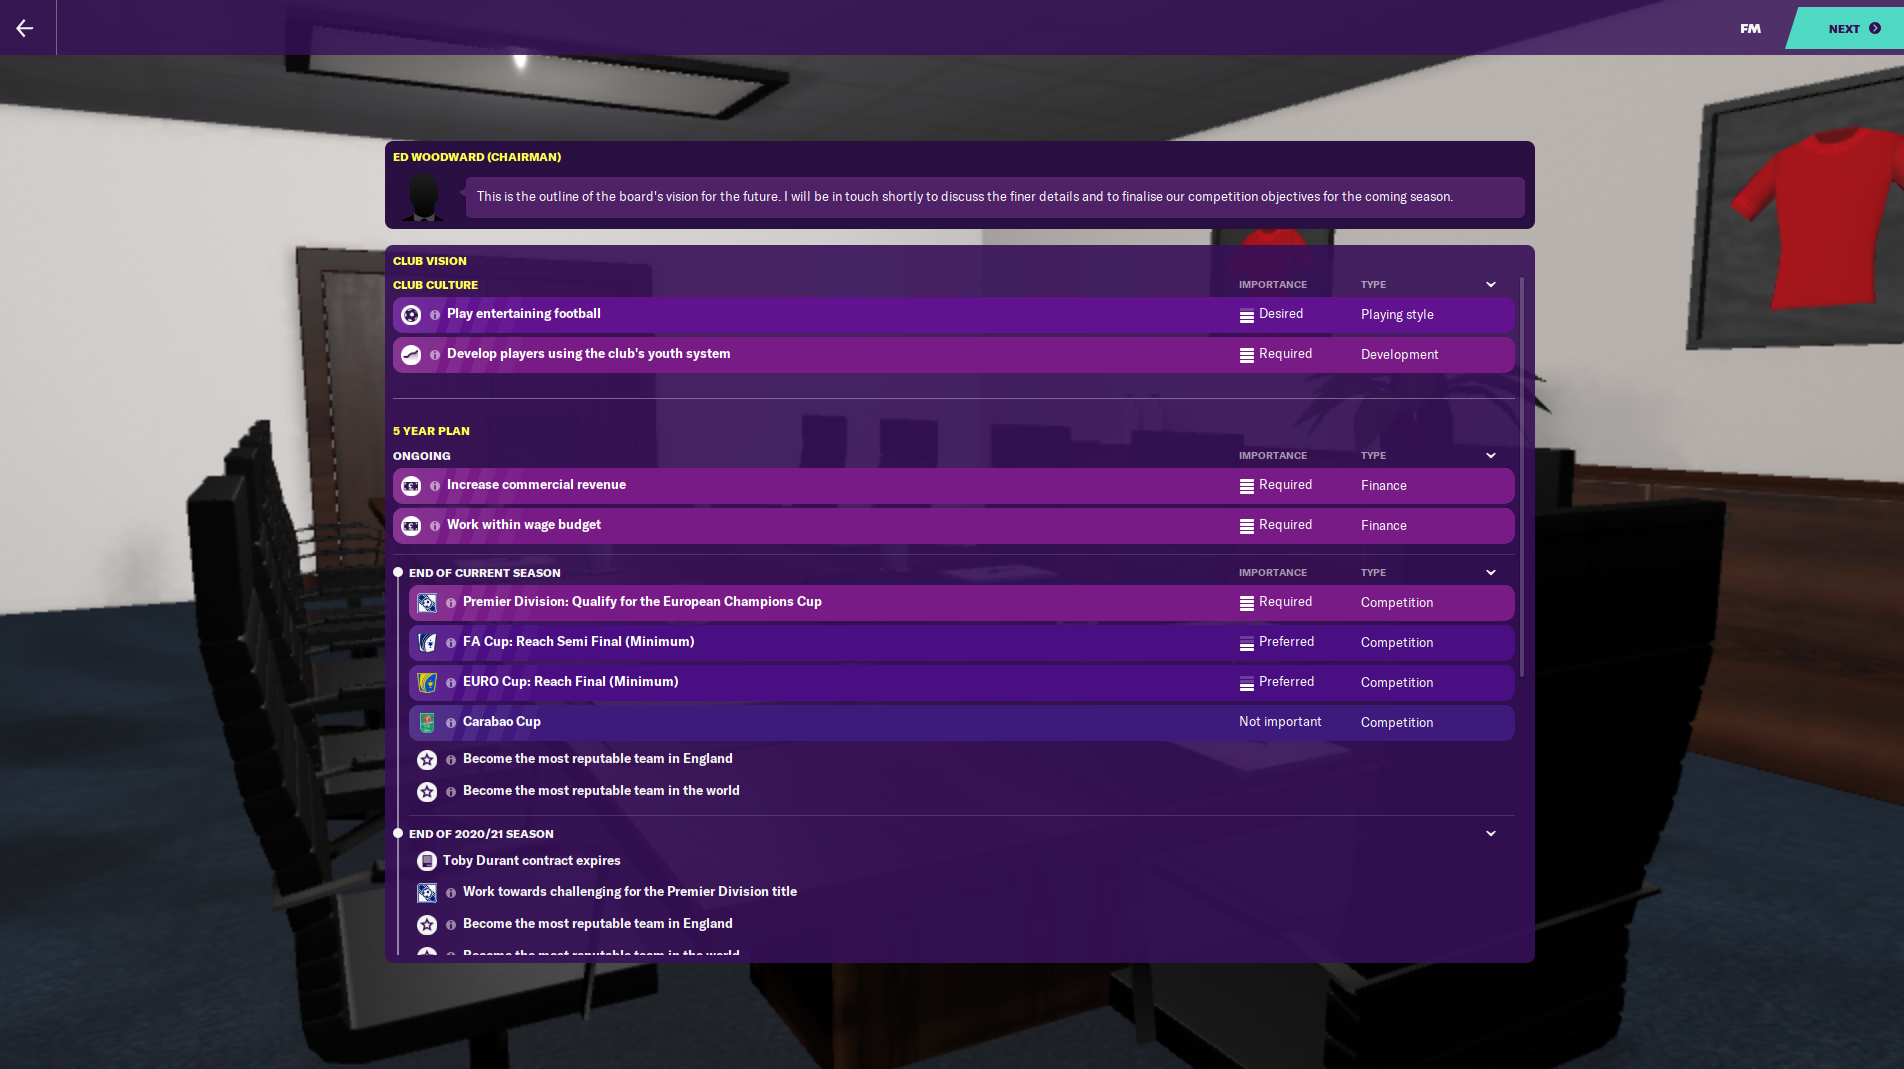 football manager 2022 manchester united fix